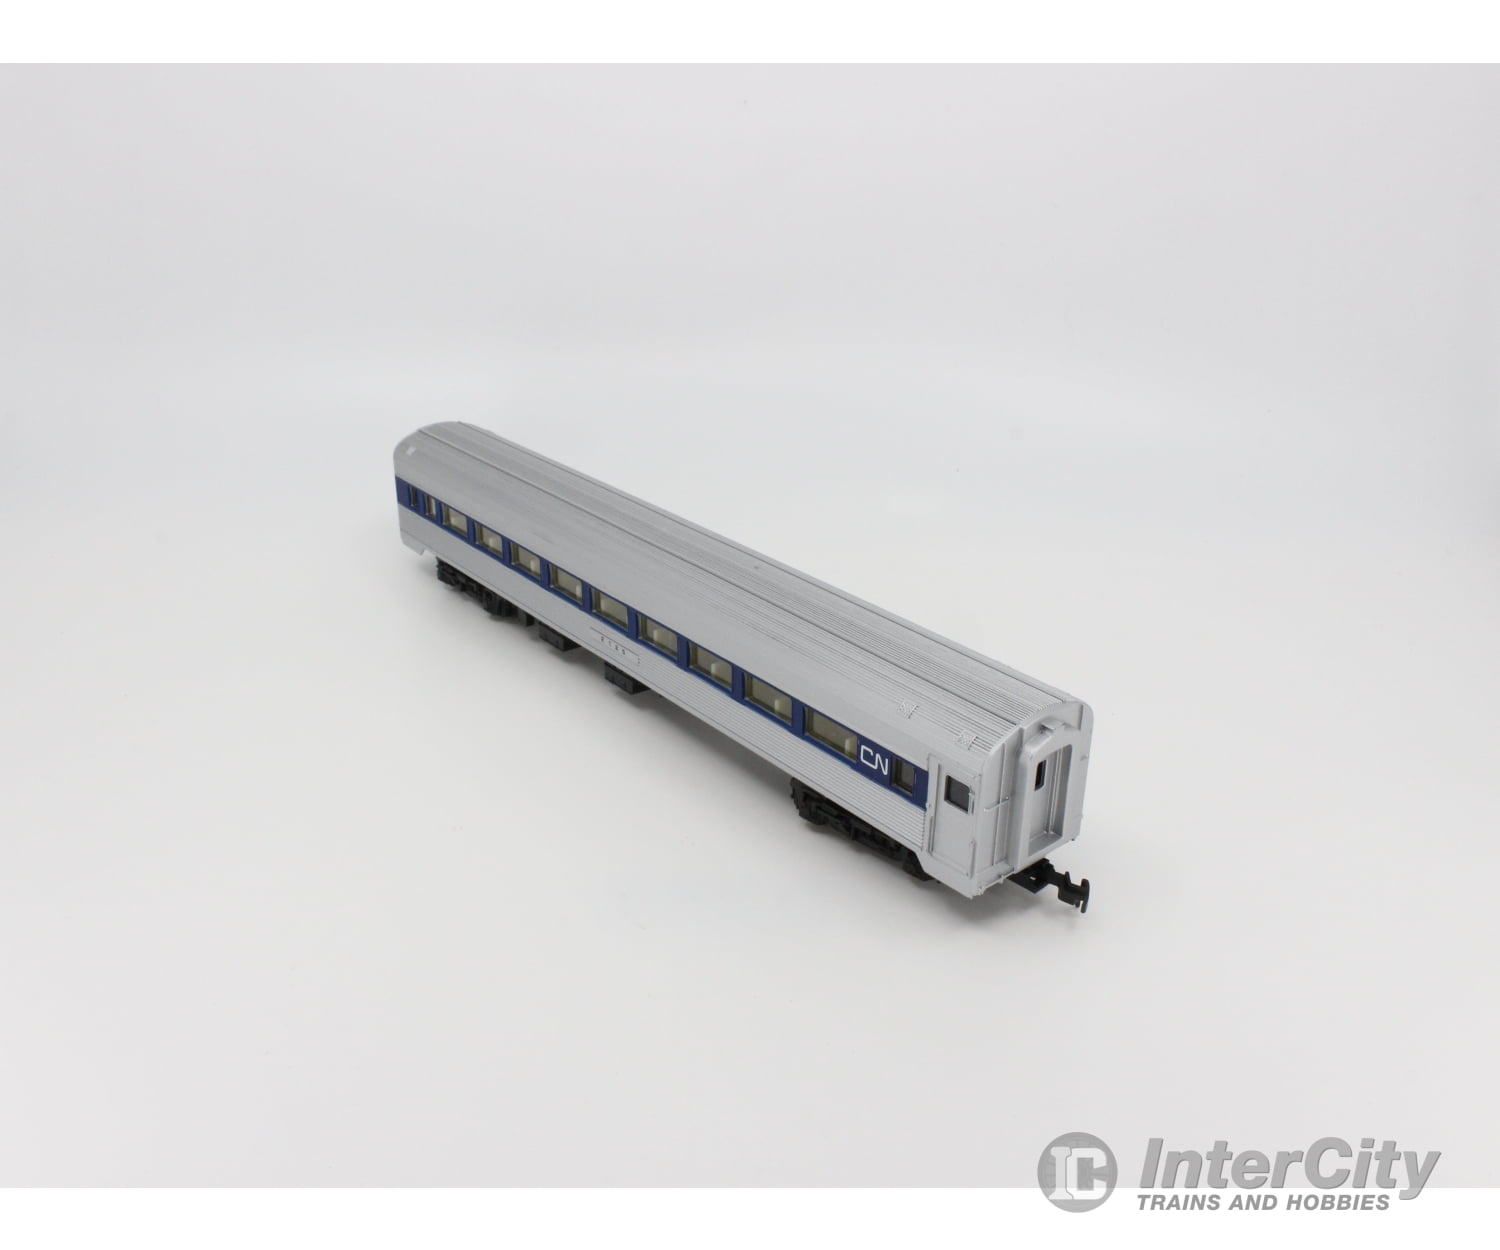 Model Power 8840 Ho Coach Passenger Car W/Interior And Metal Wheels Canadian National (Cn) 2125 Cars